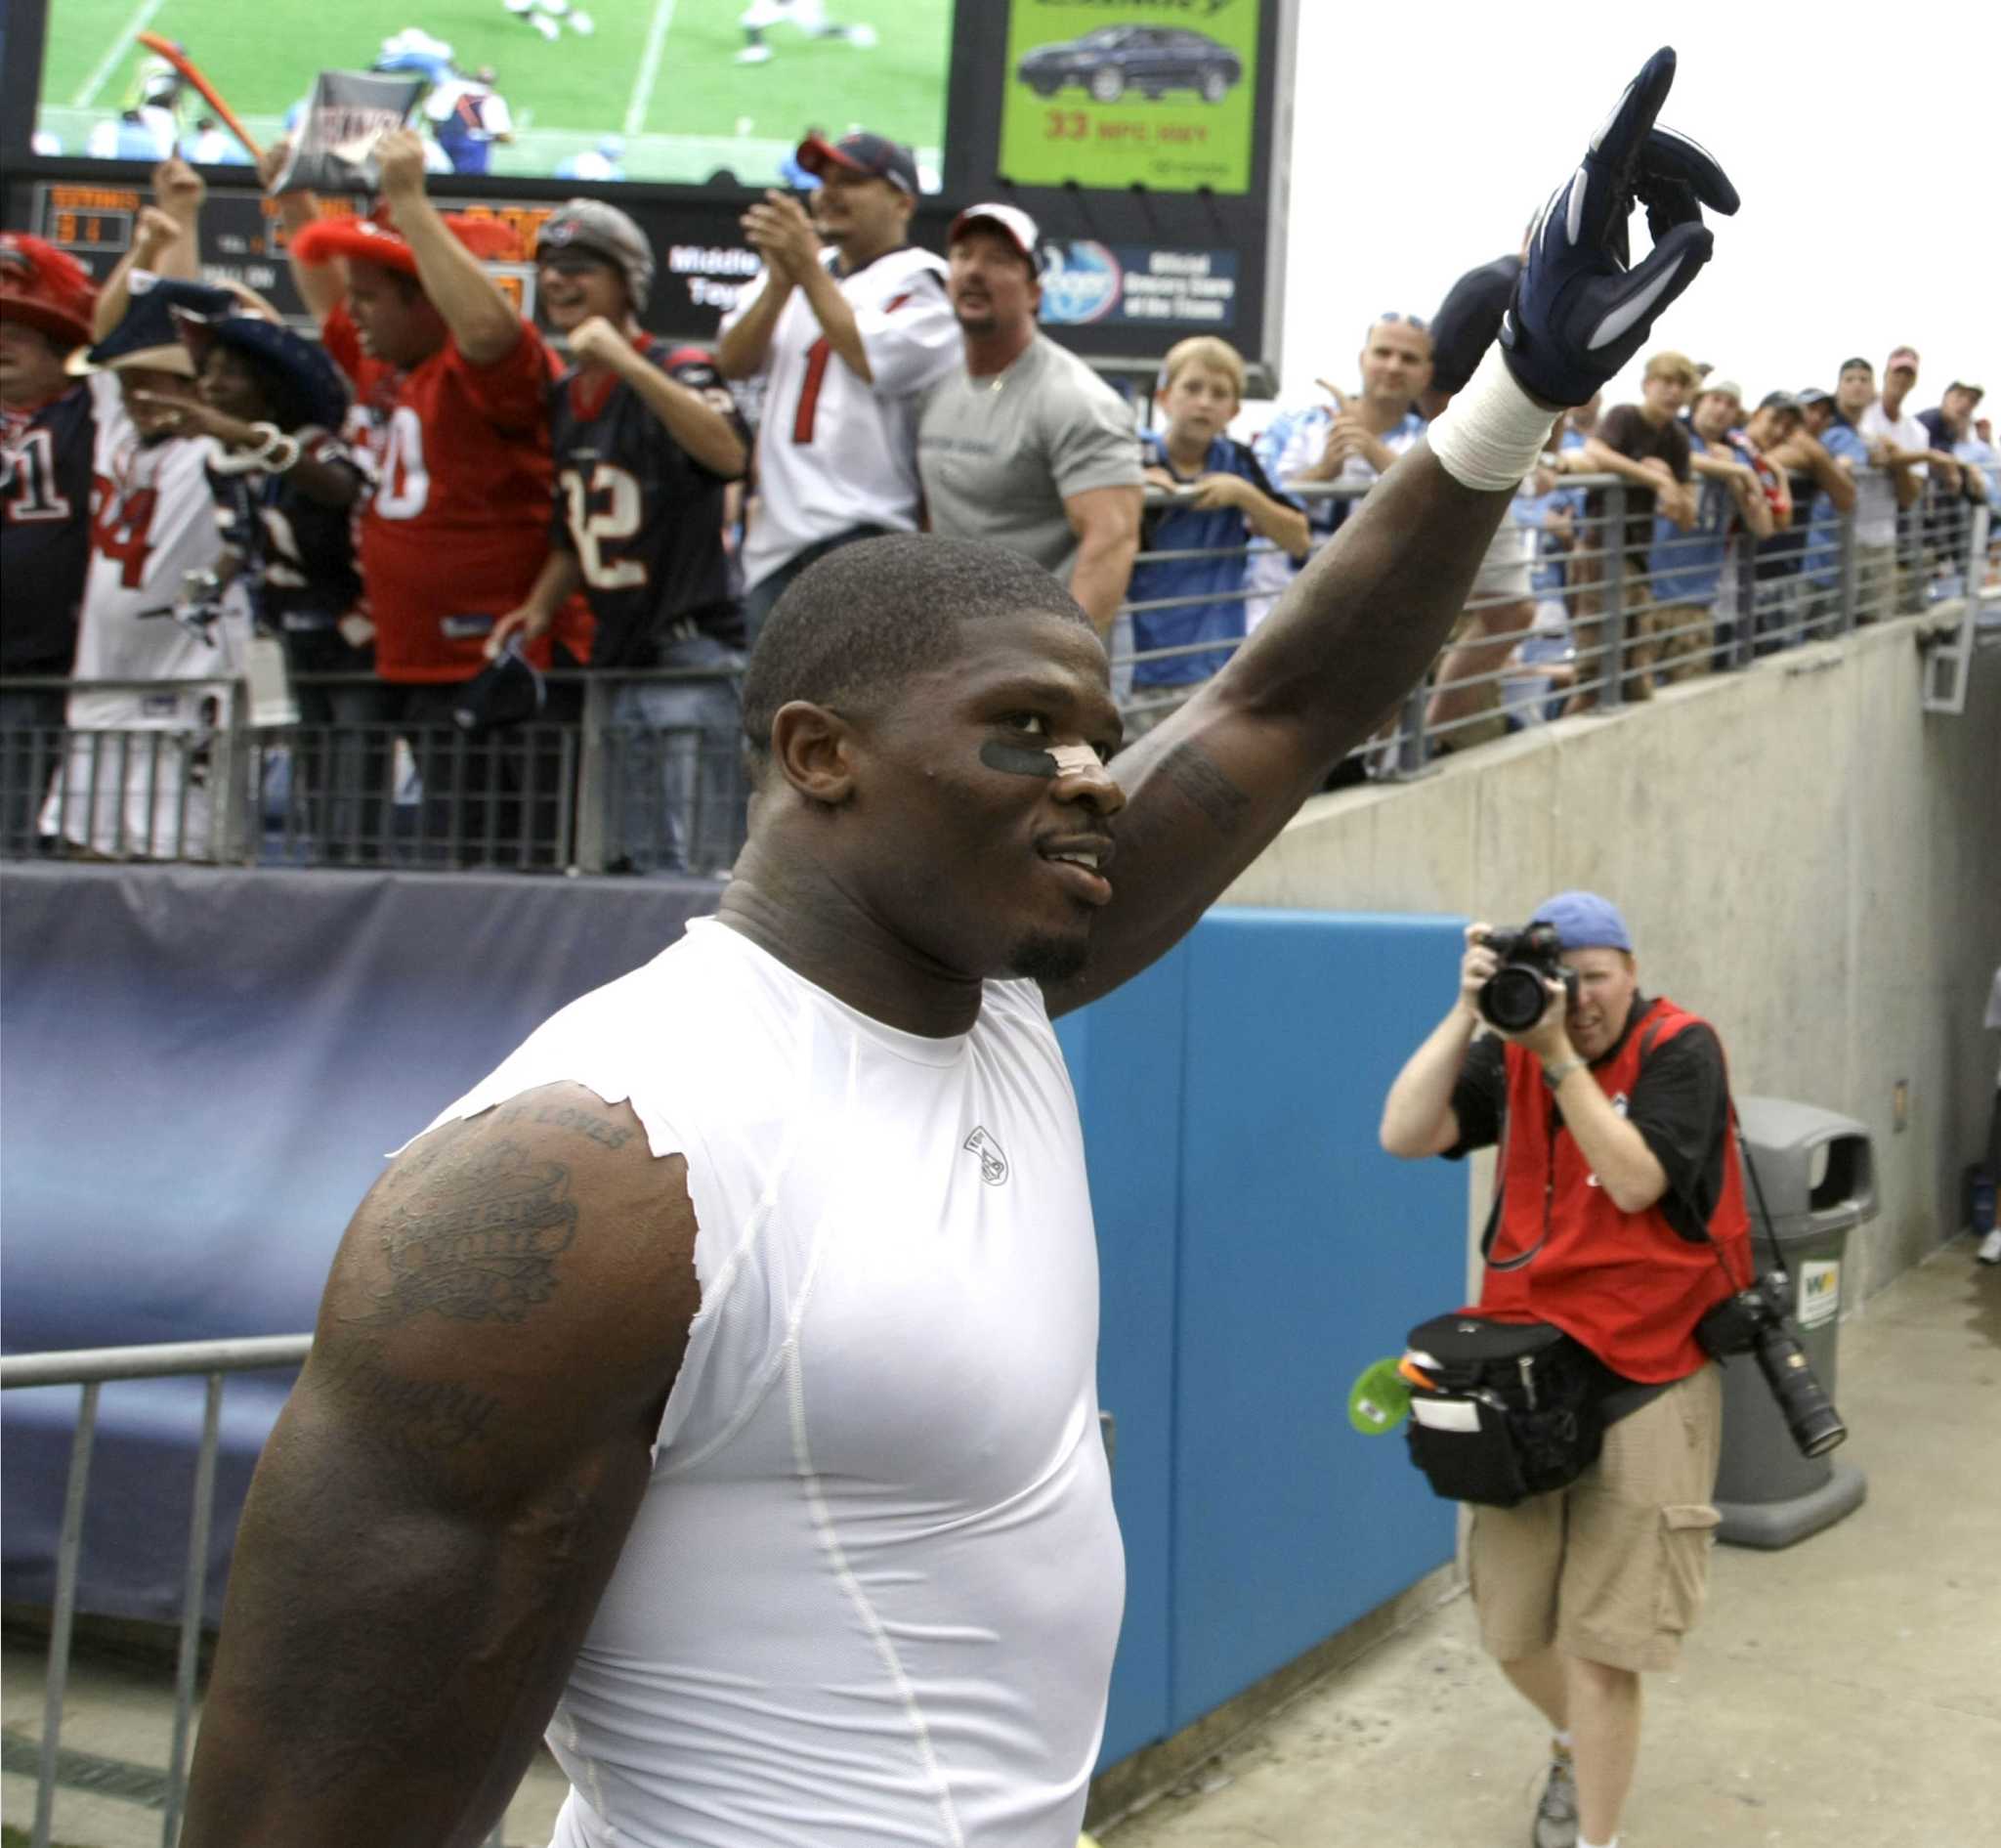 Andre Johnson almost pulled out of Texans' Ring of Honor ceremony over  McNair comments - NBC Sports